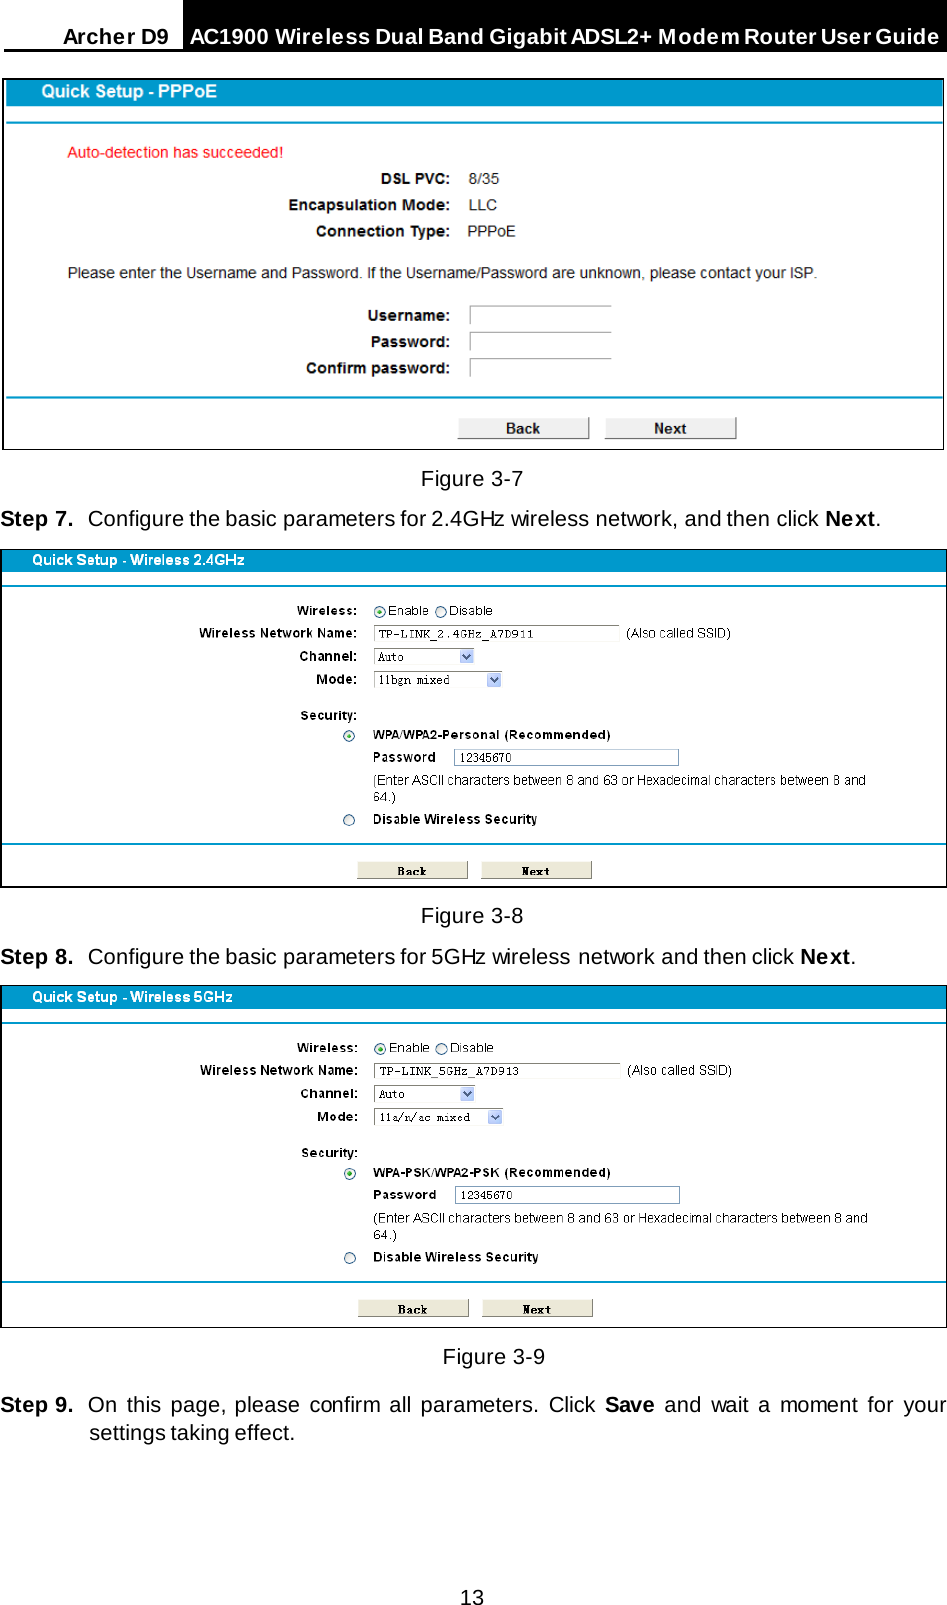 Arche r D9 AC1900 Wireless Dual Band Gigabit ADSL2+ Modem Router User Guide   Figure 3-7 Step 7. Configure the basic parameters for 2.4GHz  wireless network, and then click Next.  Figure 3-8 Step 8. Configure the basic parameters for 5GHz  wireless network and then click Next.  Figure 3-9 Step 9. On this page, please confirm all parameters. Click  Save and wait a moment for your settings taking effect. 13 